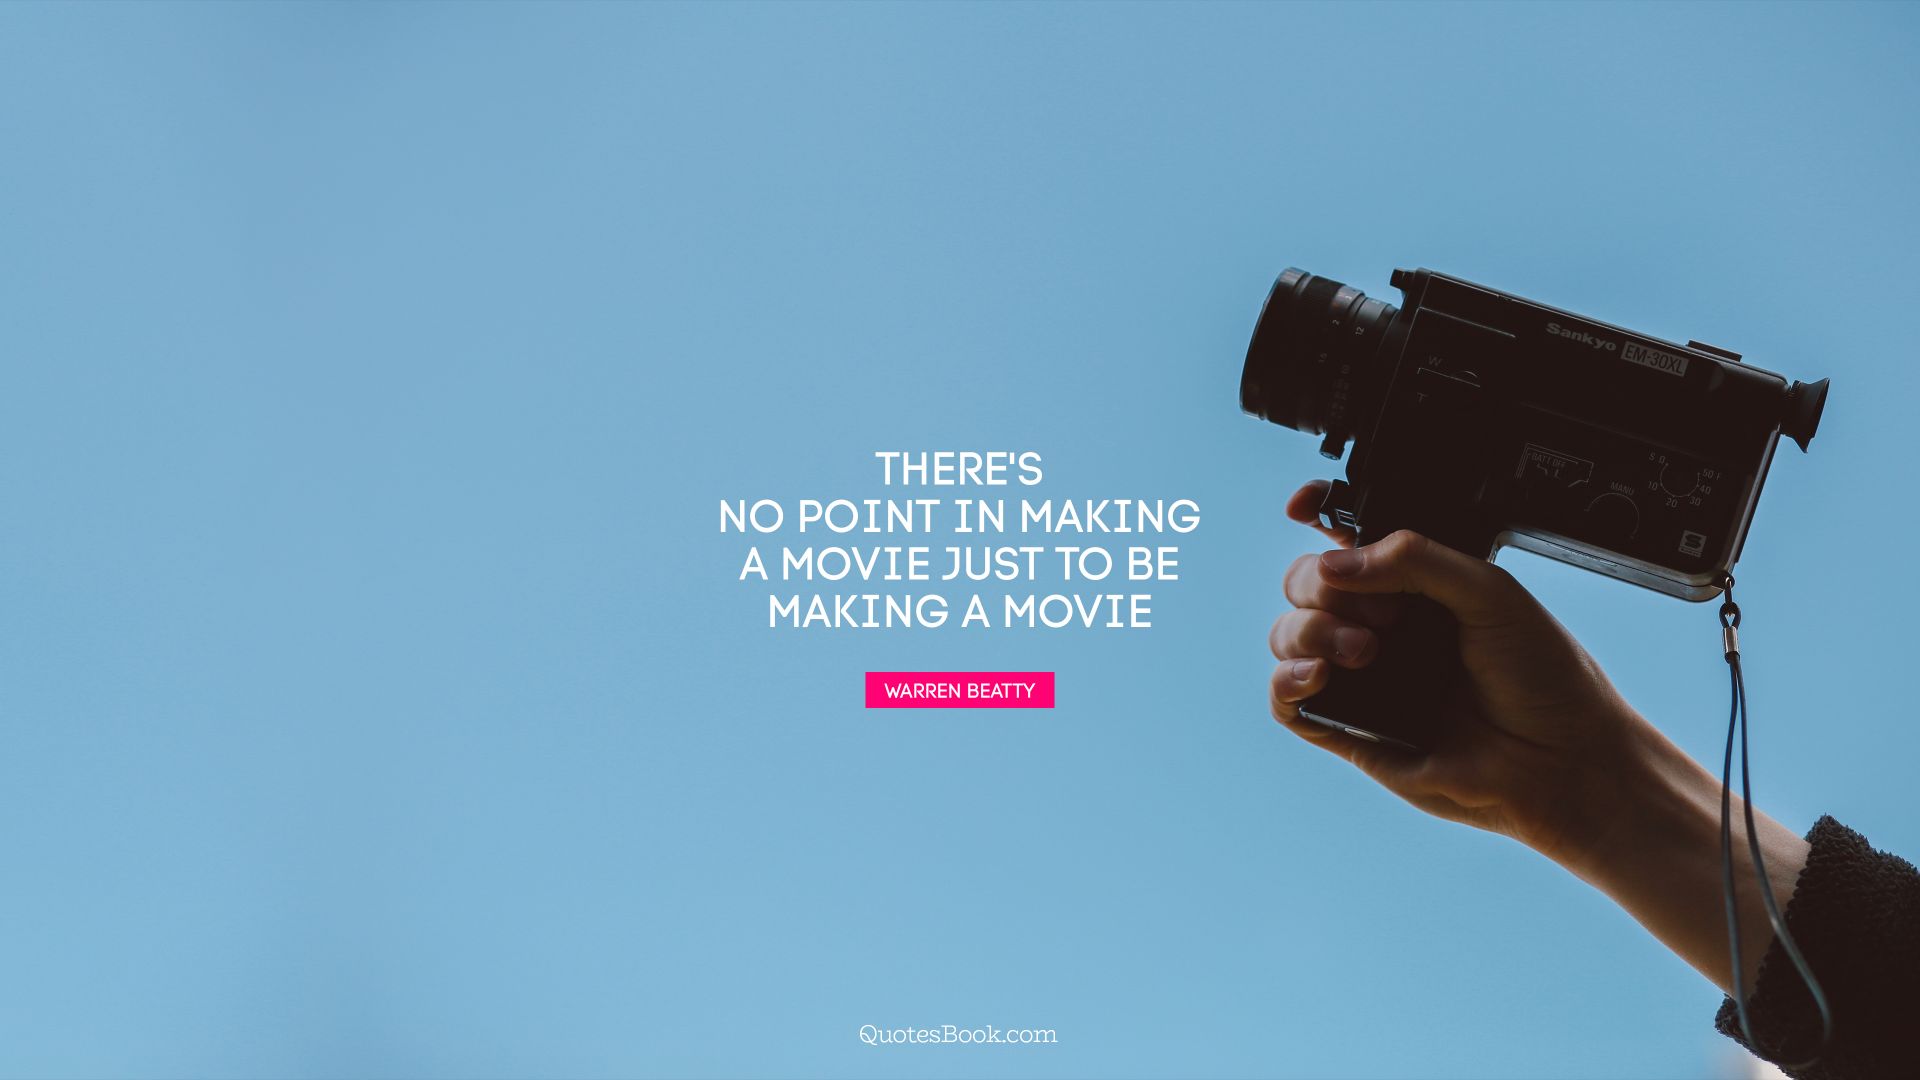 There's no point in making a movie just to be making a movie. - Quote by Warren Beatty